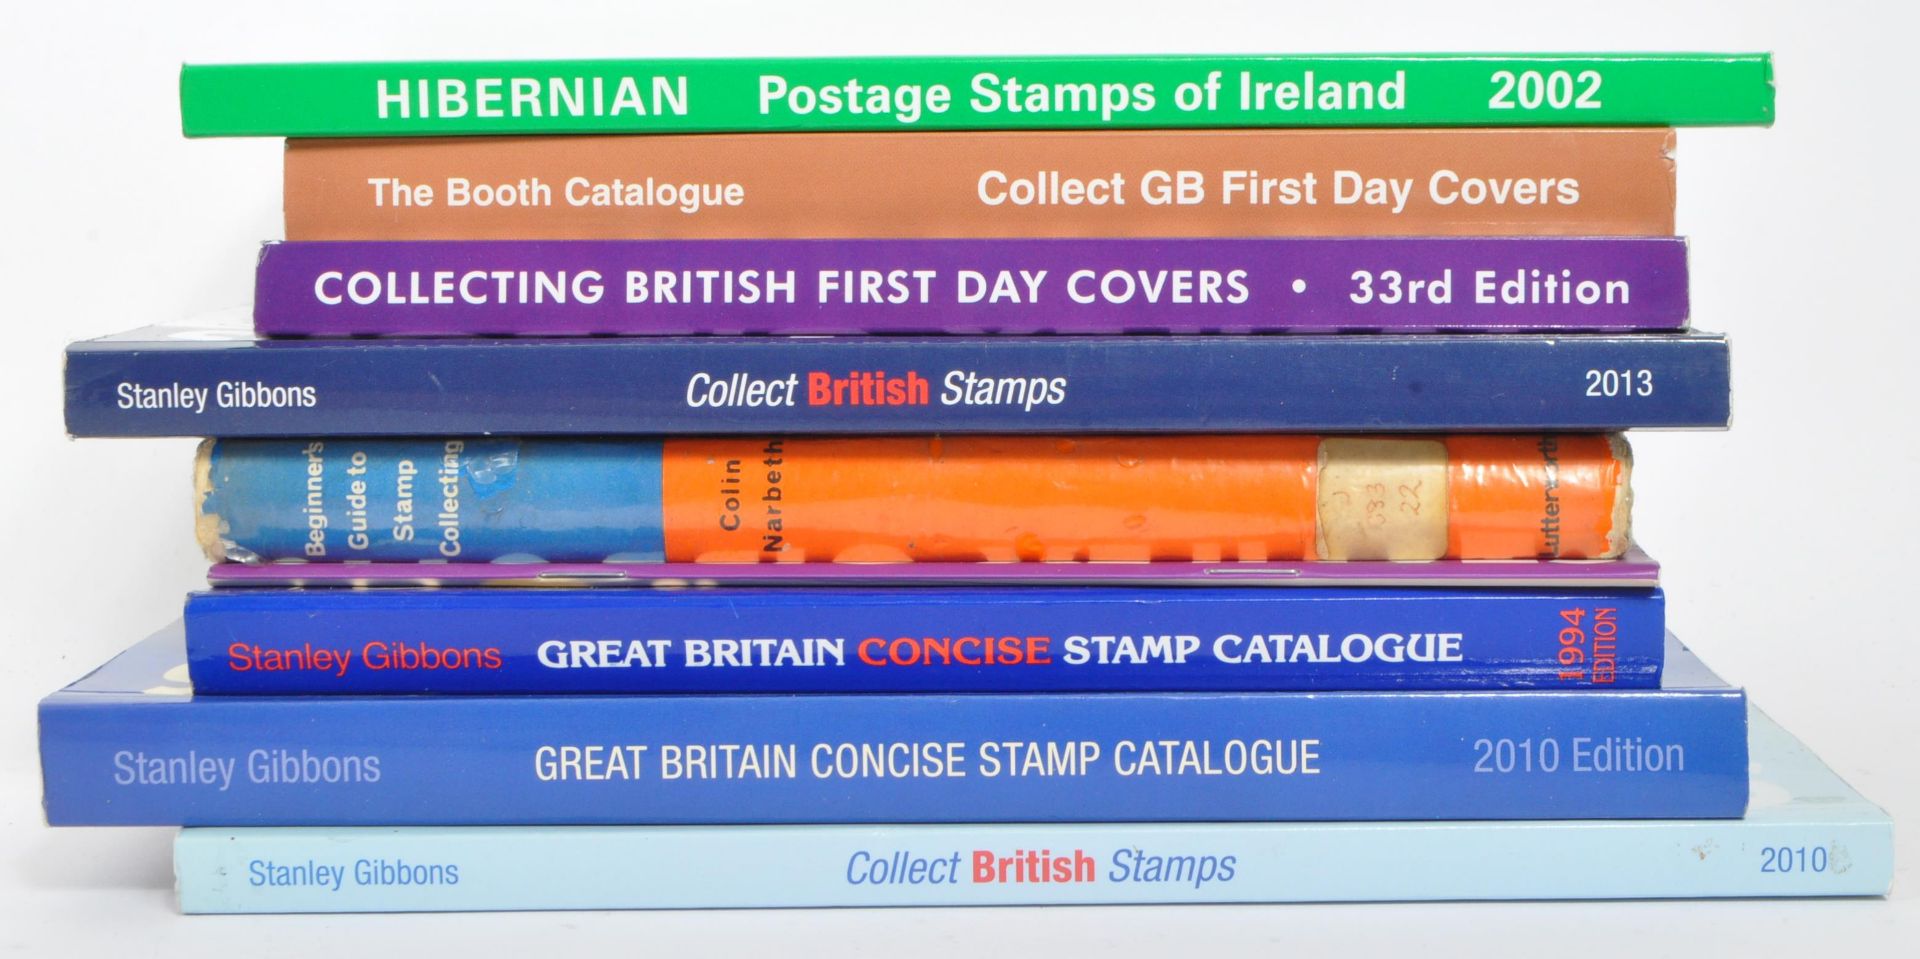 COLLECTION OF UK FIRST DAY COVERS & STAMP REFERENCE BOOKS - Image 14 of 14